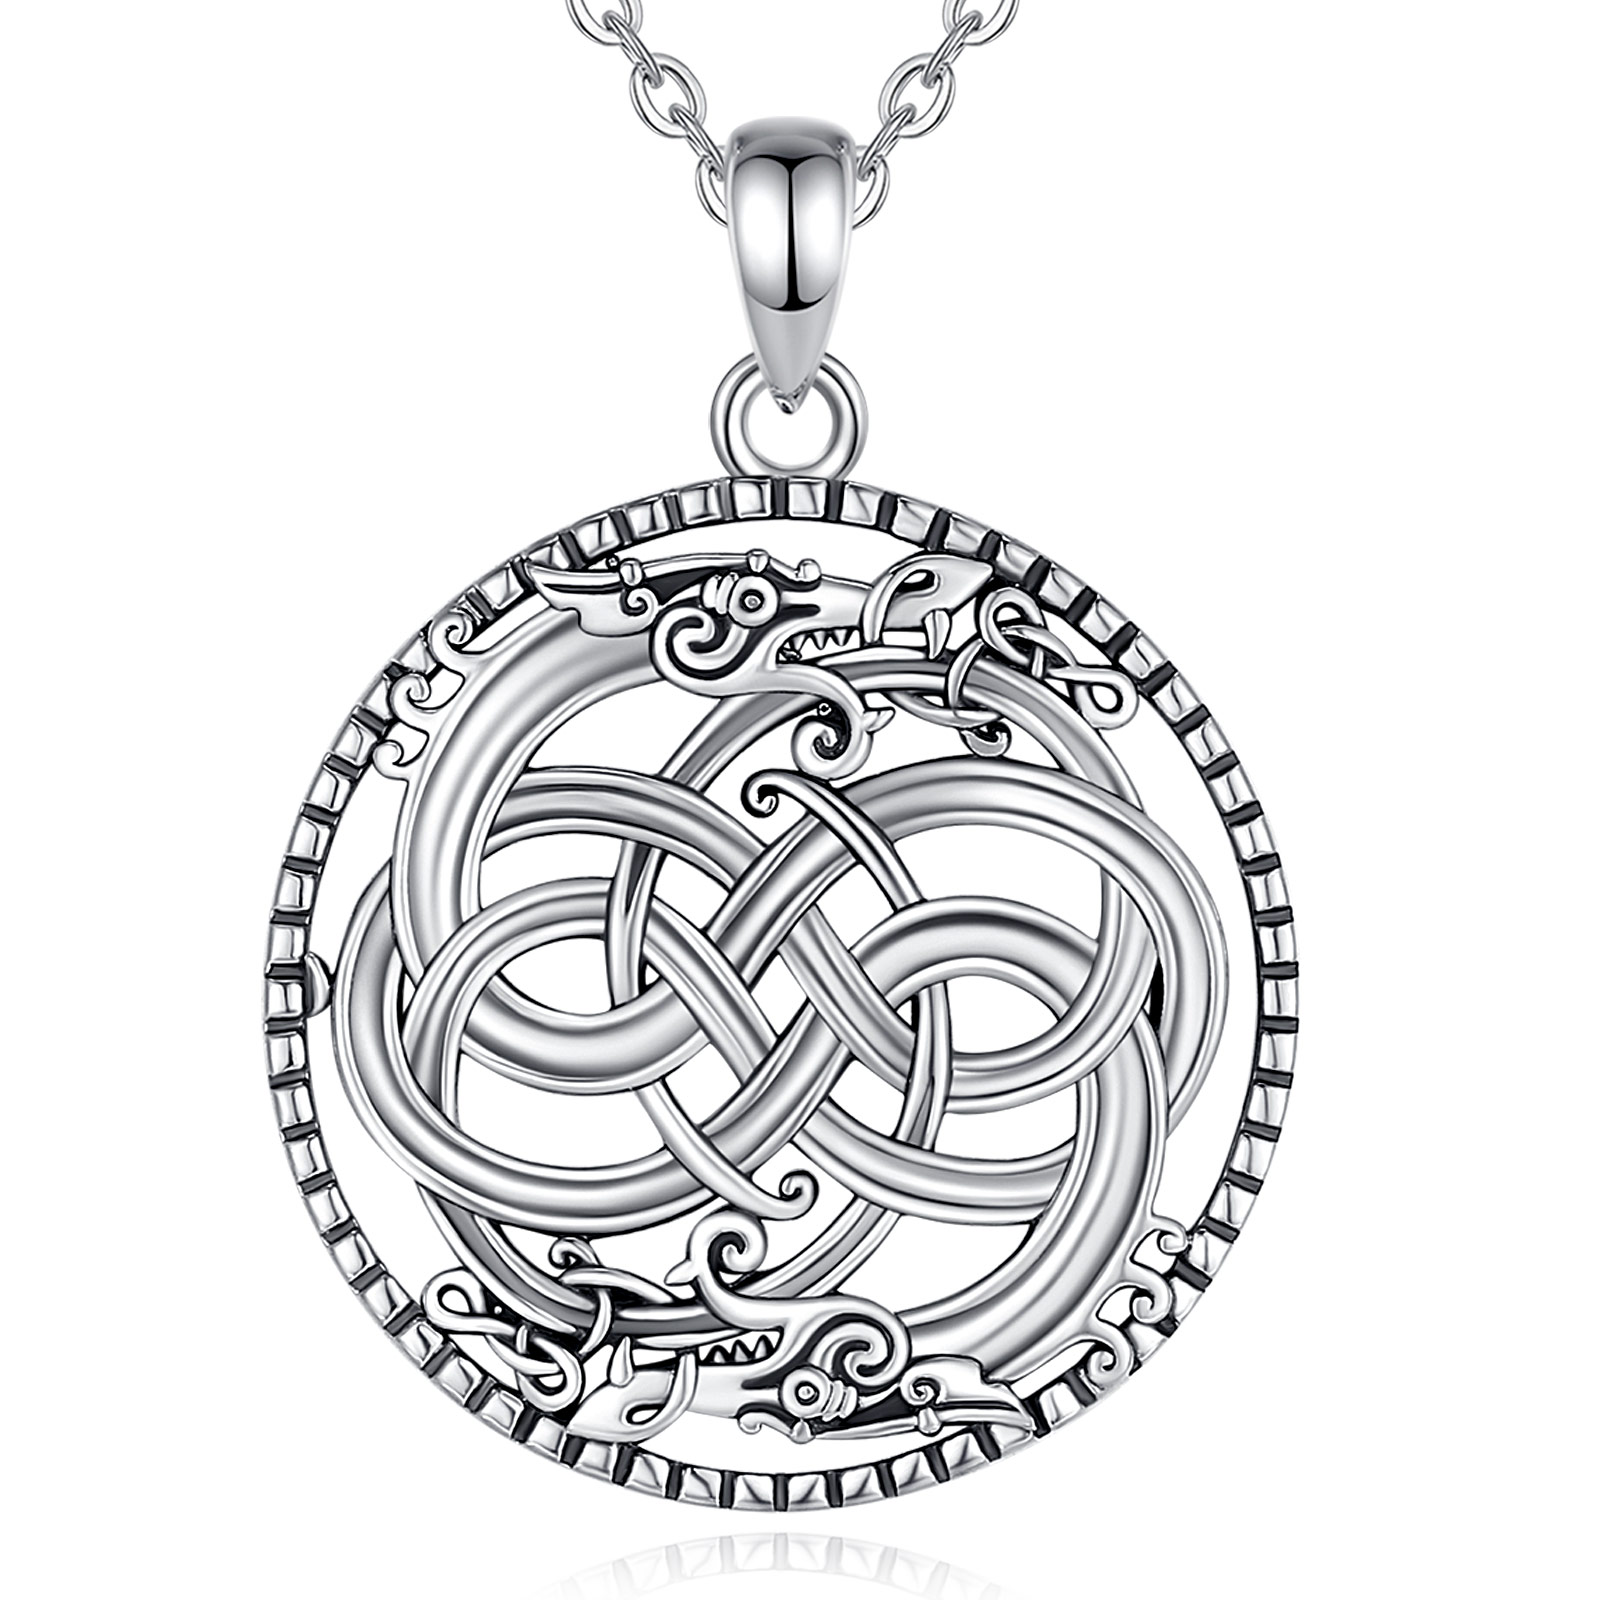 Merryshine Jewelry 925 Sterling Silver Celtic Knot Dragon Design Pendant Necklace for Men